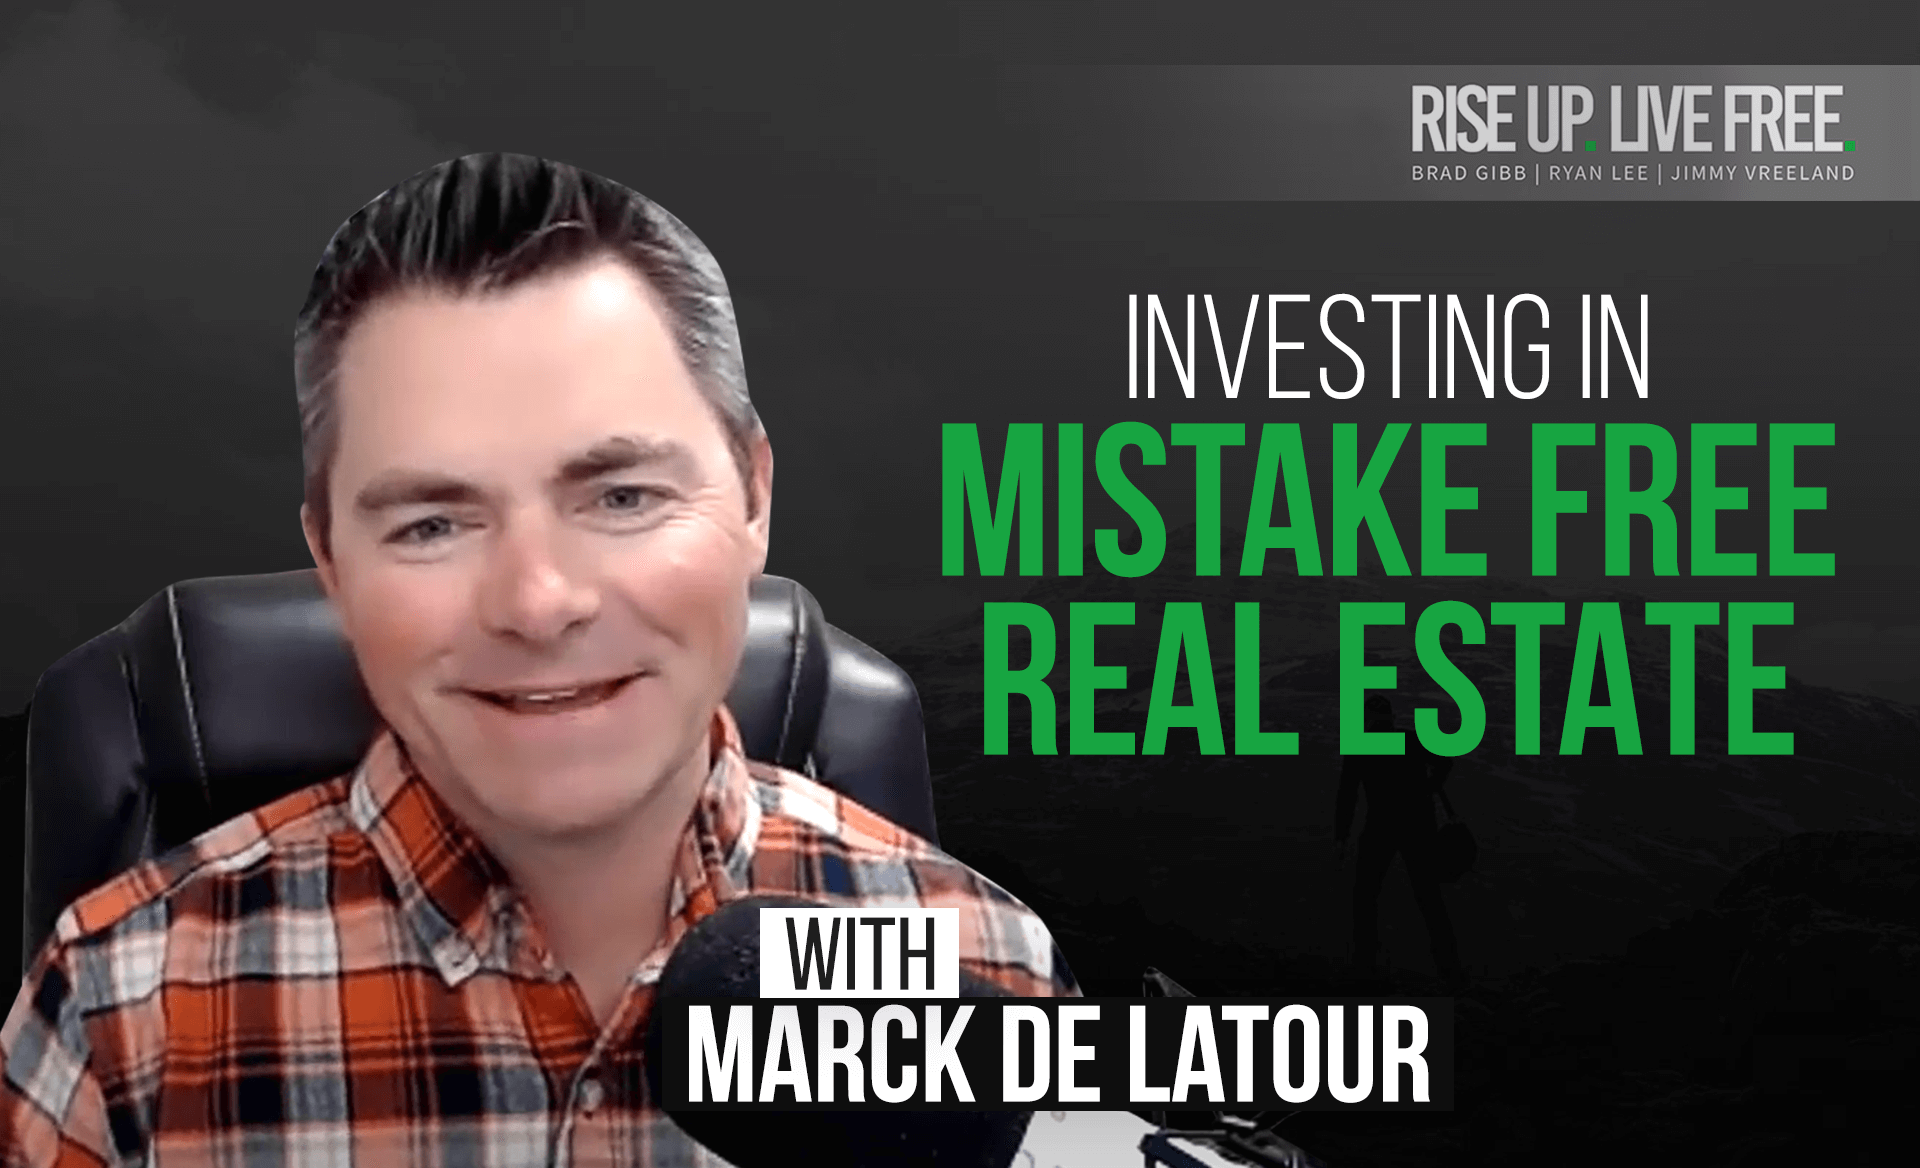 Investing in mistake free real estate